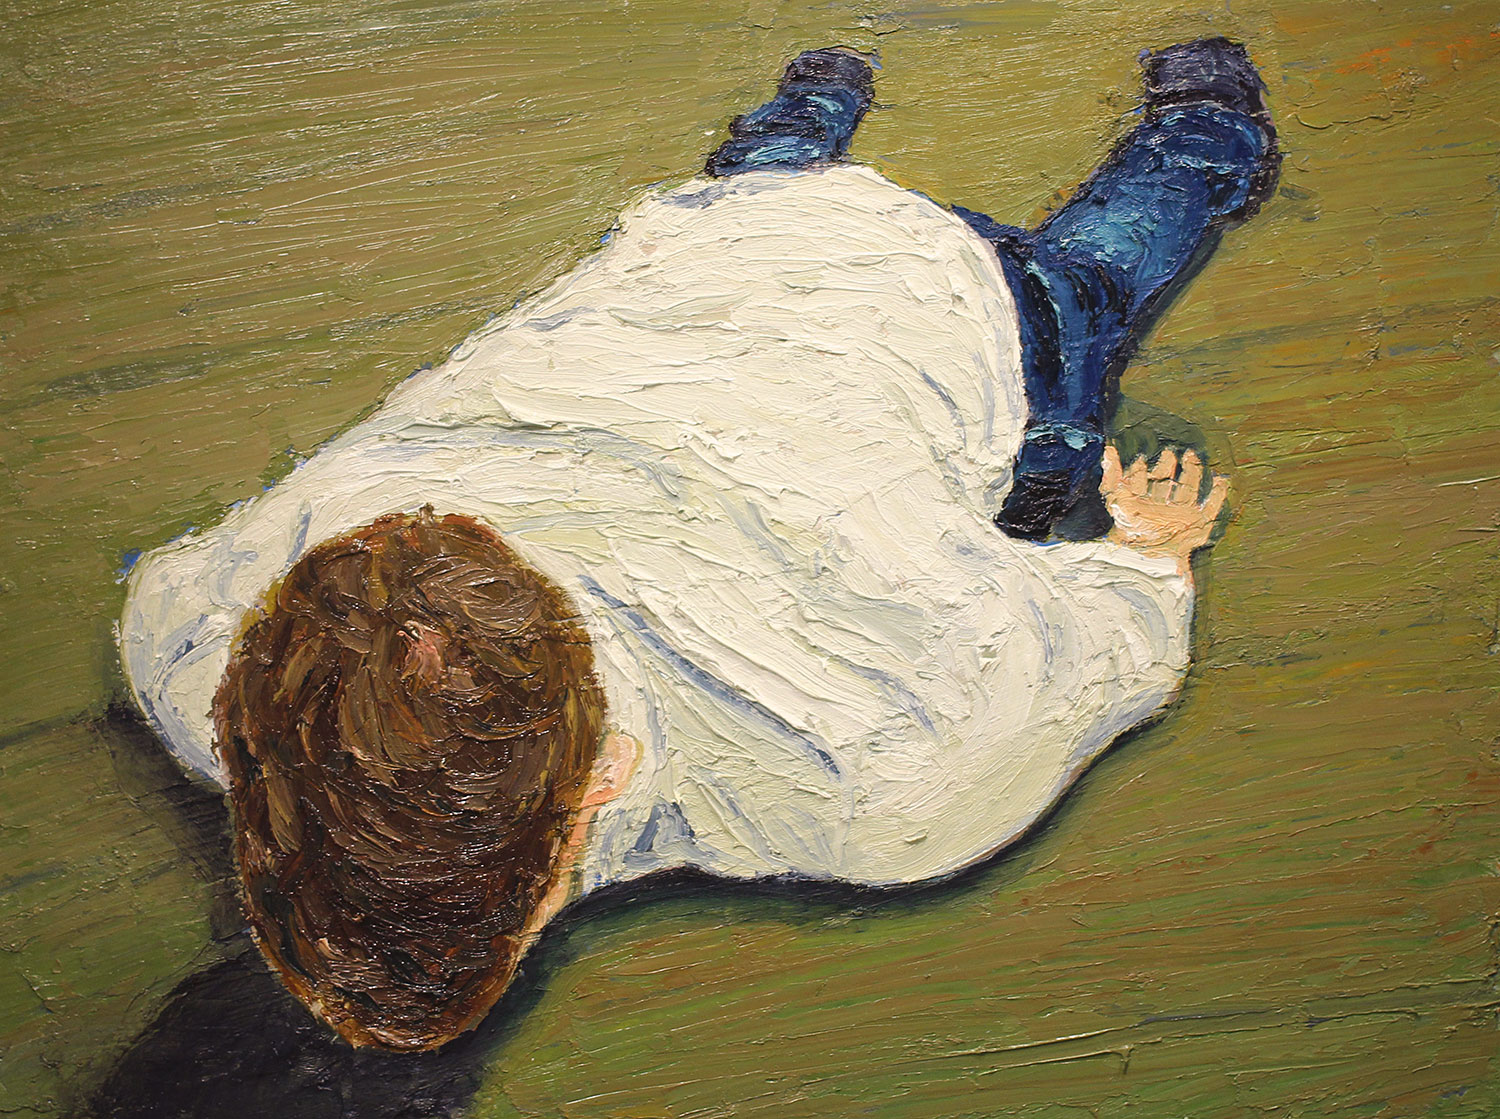 Thony Aiuppy, Prostrate, 2013. Oil on wood, 36 x 48 in.